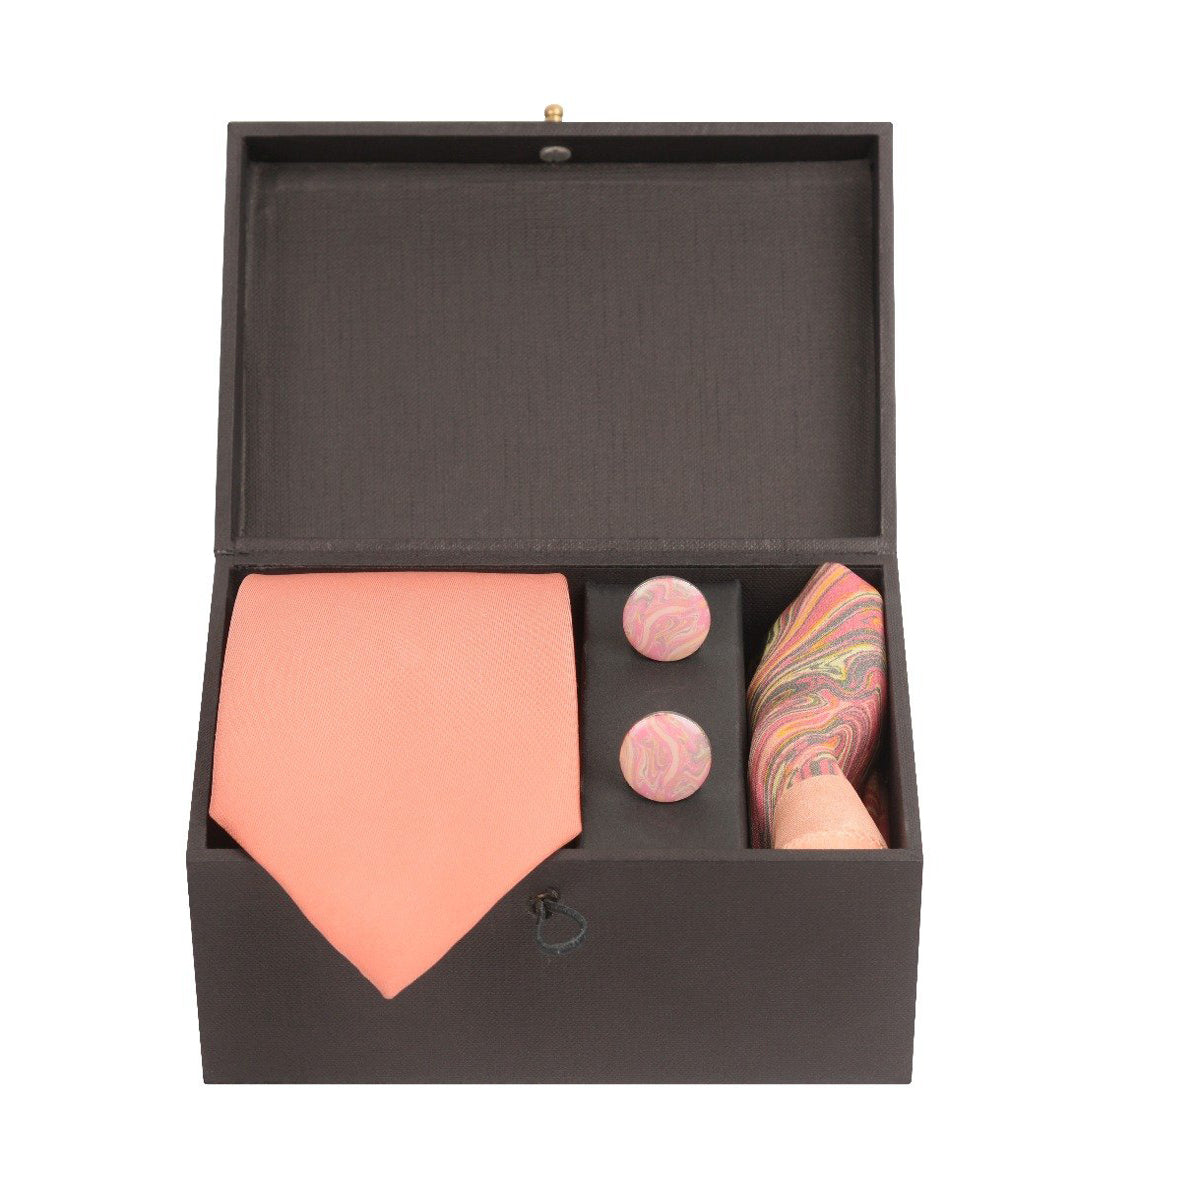 Chokore Pink color 3-in-1 Gift set